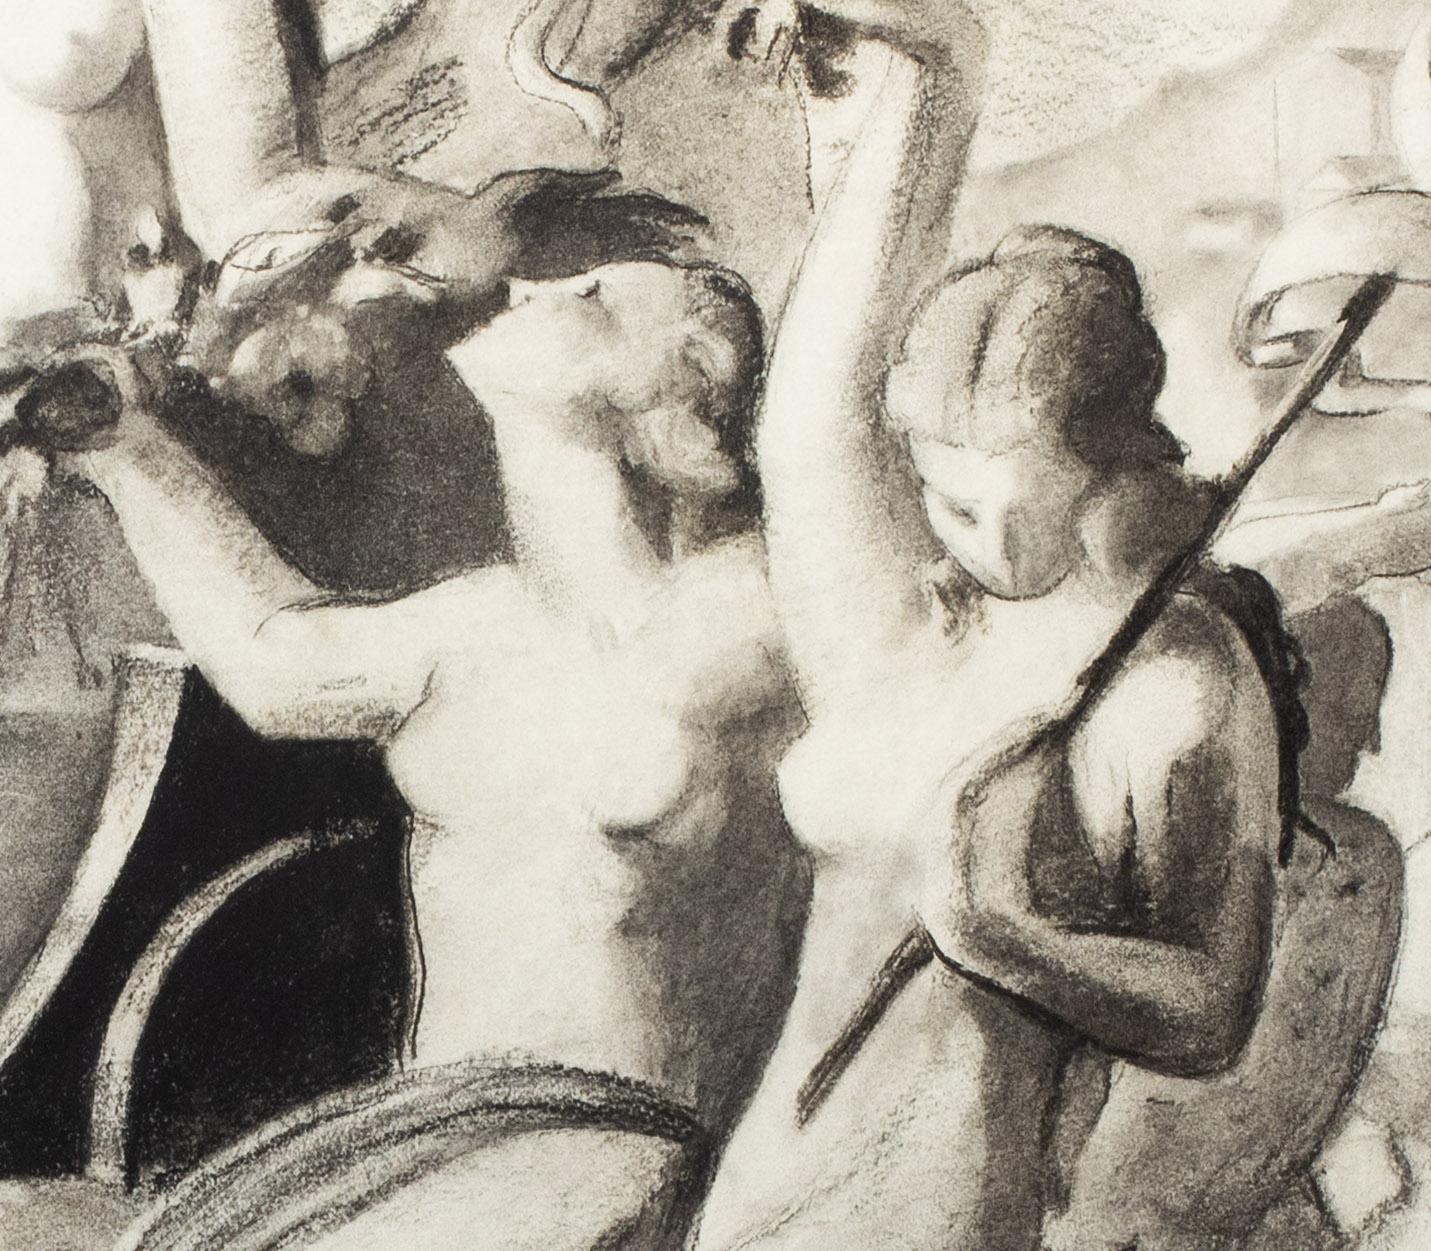 Jean Dupas (French, 1882-1964)
The Triumph of Venus
charcoal on paper
signed and dated '33/JEAN DUPAS' 
(lower right) 
25 x 31.1/8 in. (63.5 x 79 cm.)

Dupas was born in Bordeaux. He won the prix de Rome in 1910. His personal style ranges from